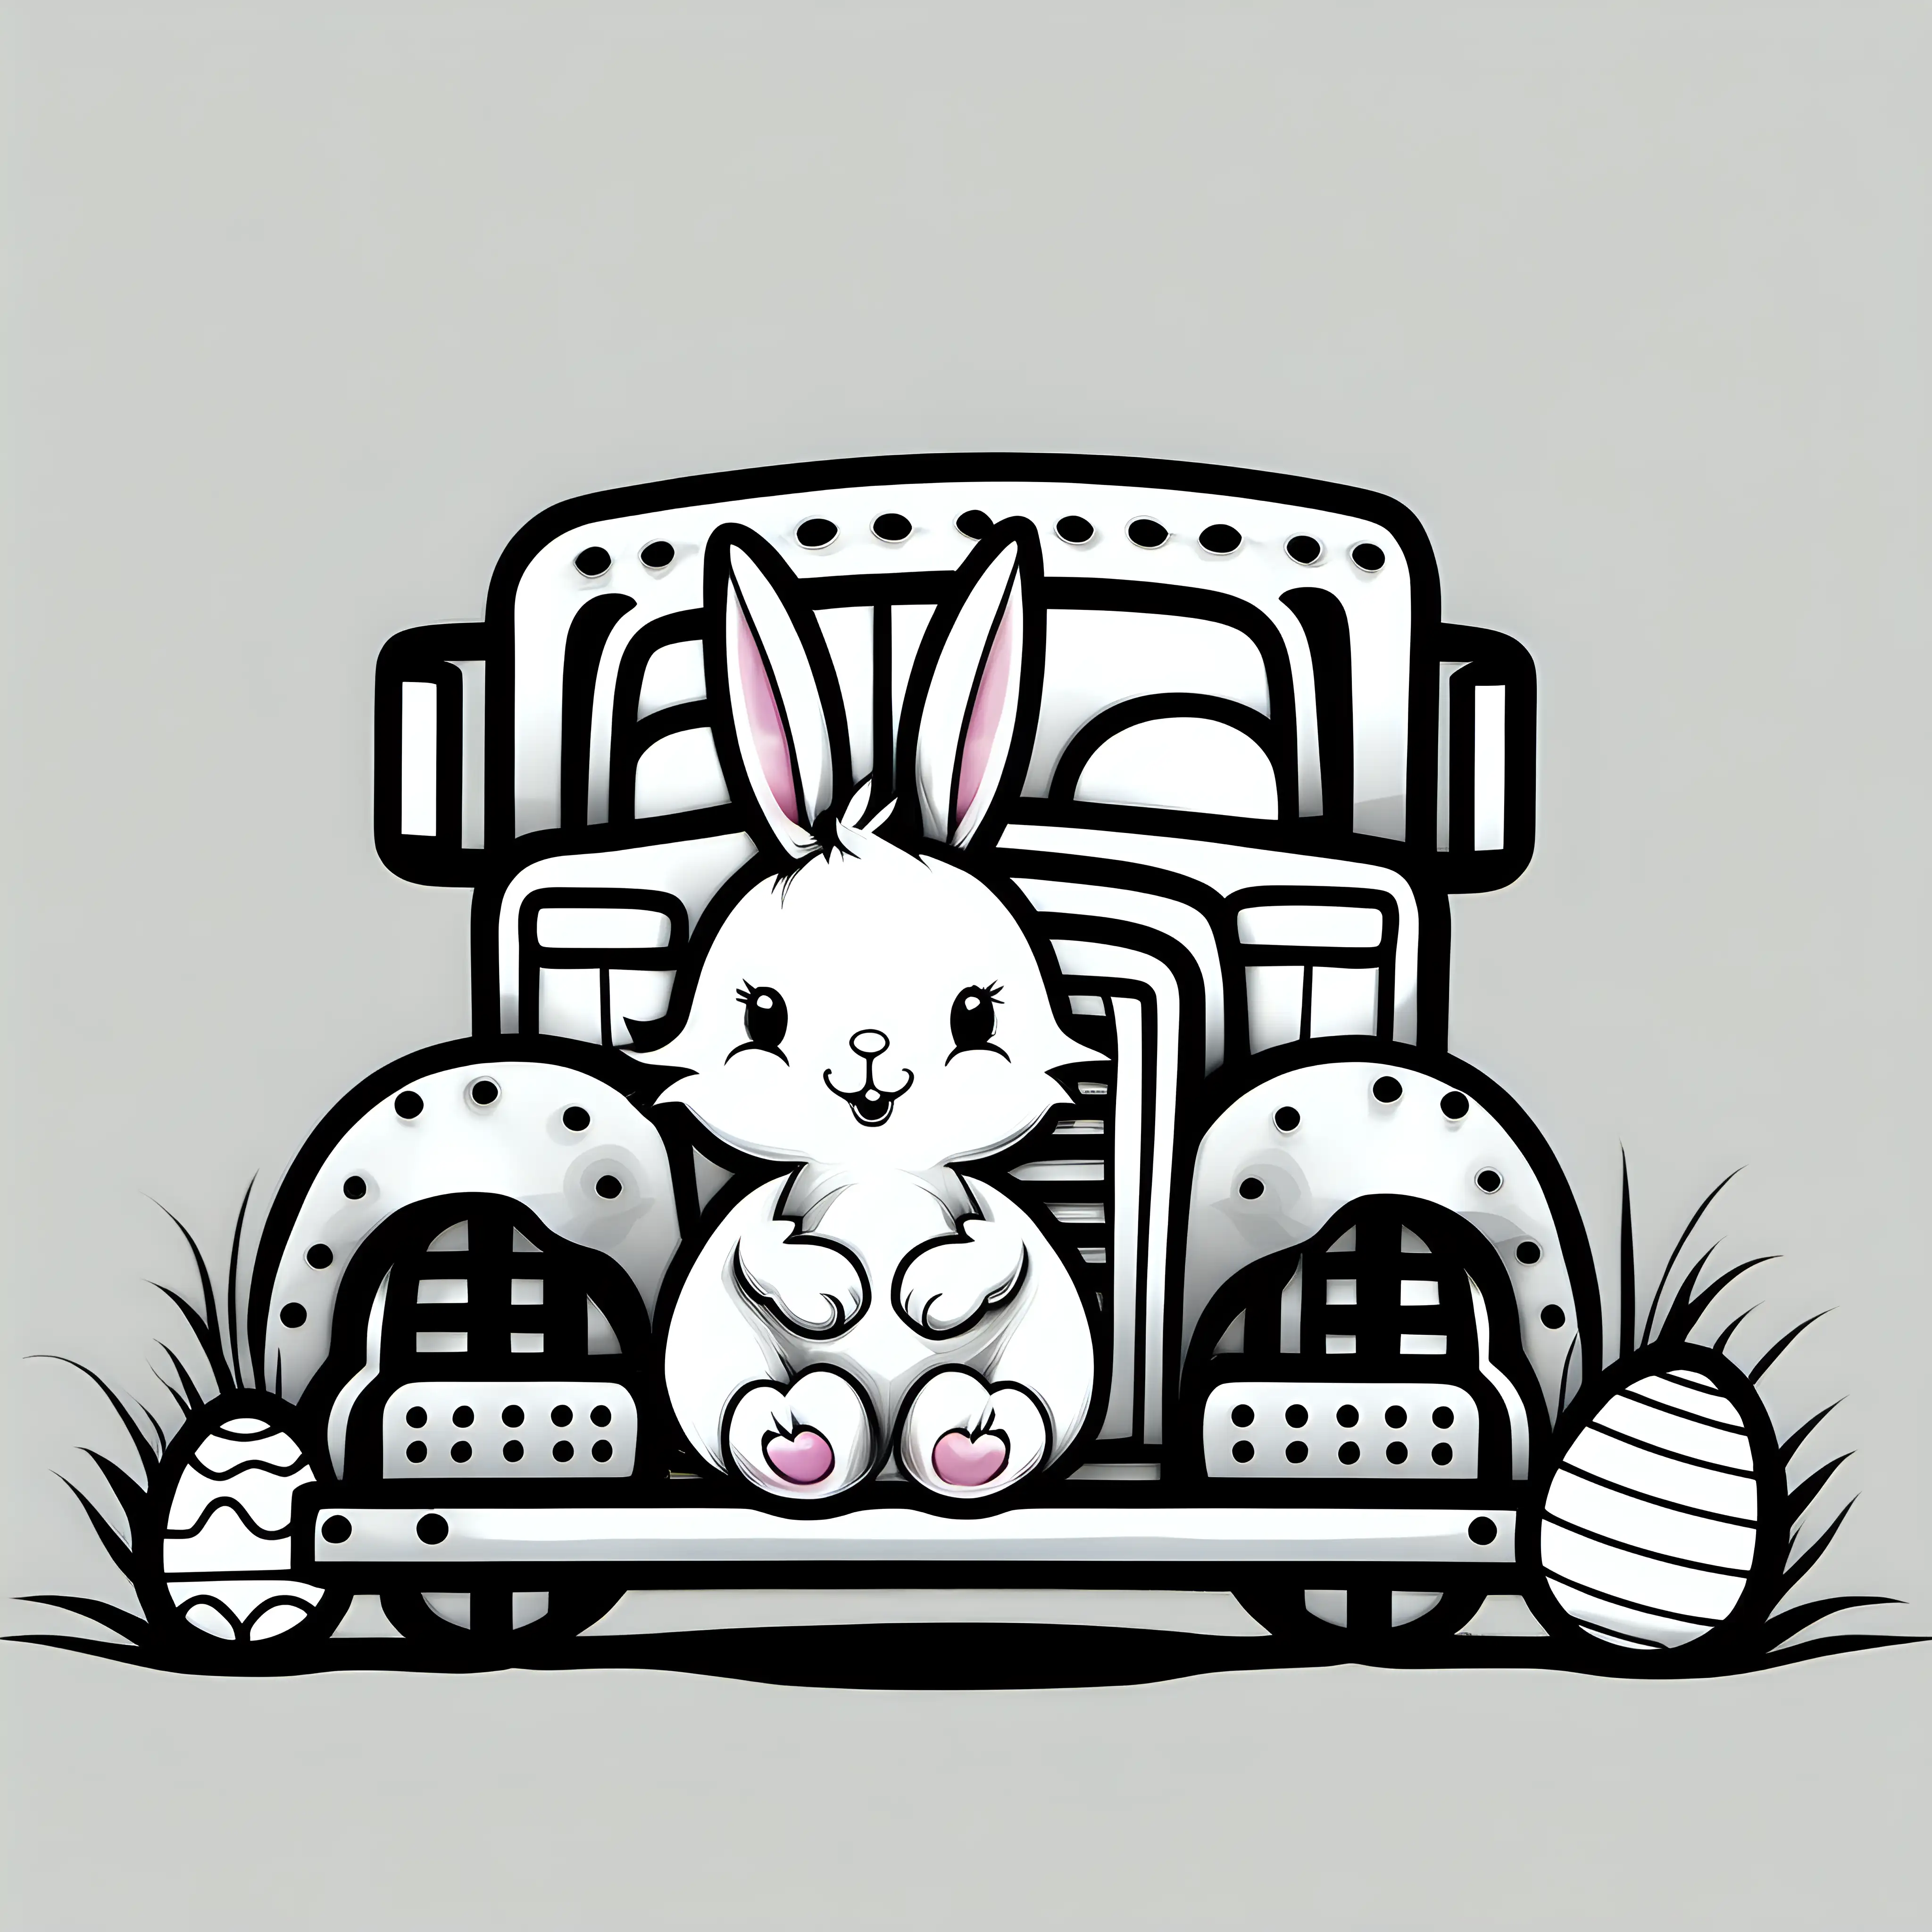 Cheerful Easter Bunny with Truck in Black Featuring Bold Outlines